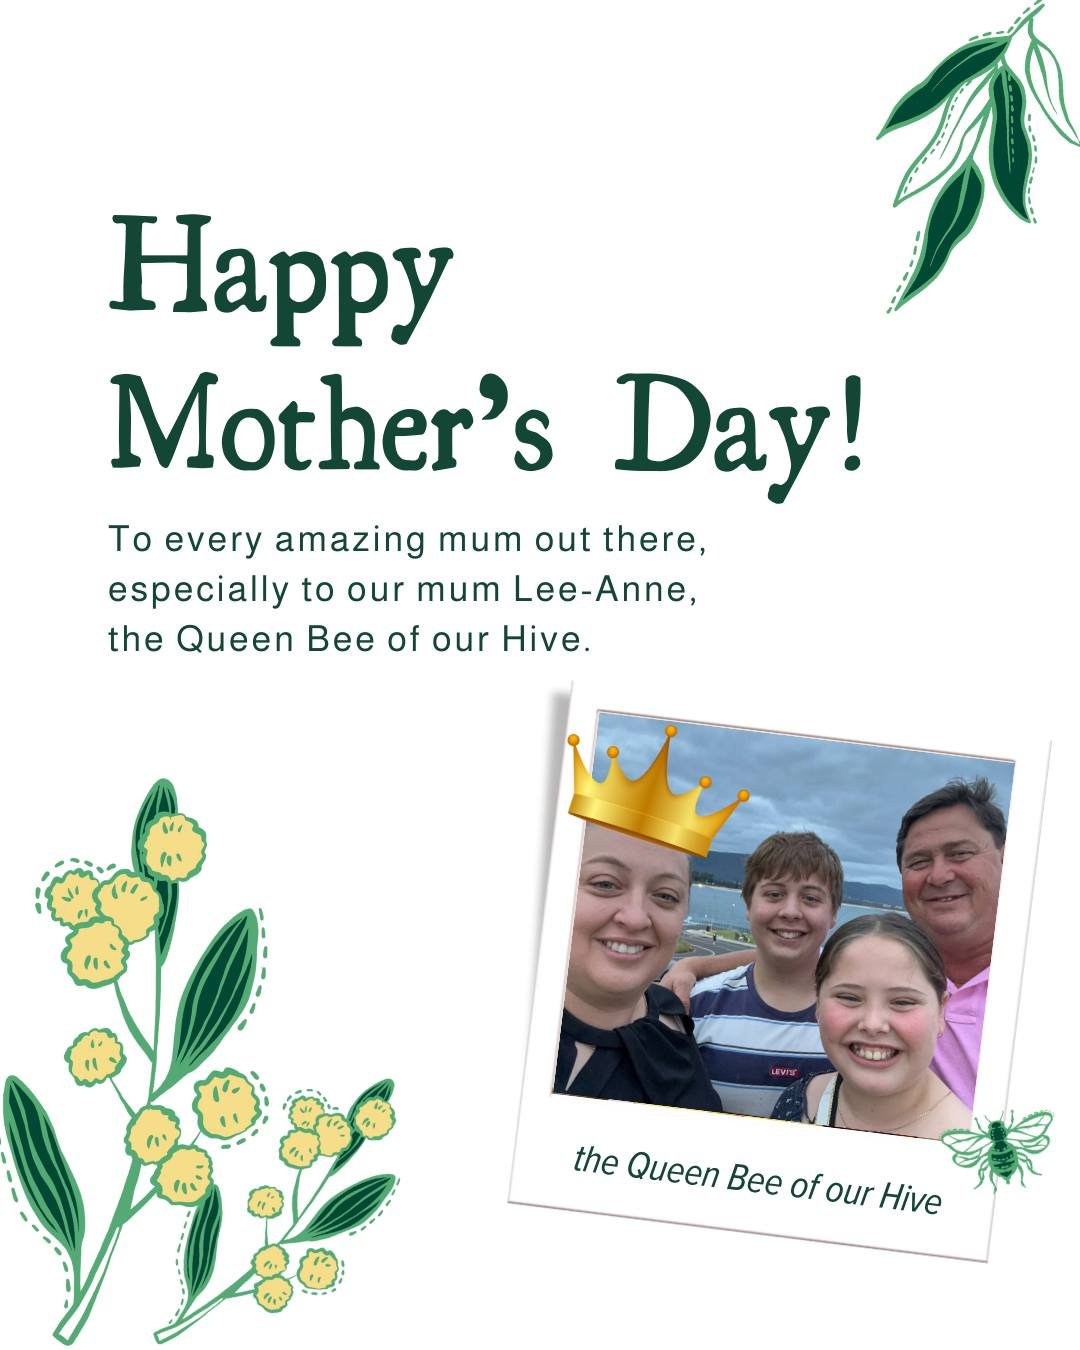 To all the amazing mums out there, may your day be extra sweet like honey🍯, filled with much love and warmth with your families today. Happy Mother's Day!💐💛🤗

Most especially to our mum Lee-Anne, the QUEEN BEE of our Hive.👑🐝 We appreciate you e